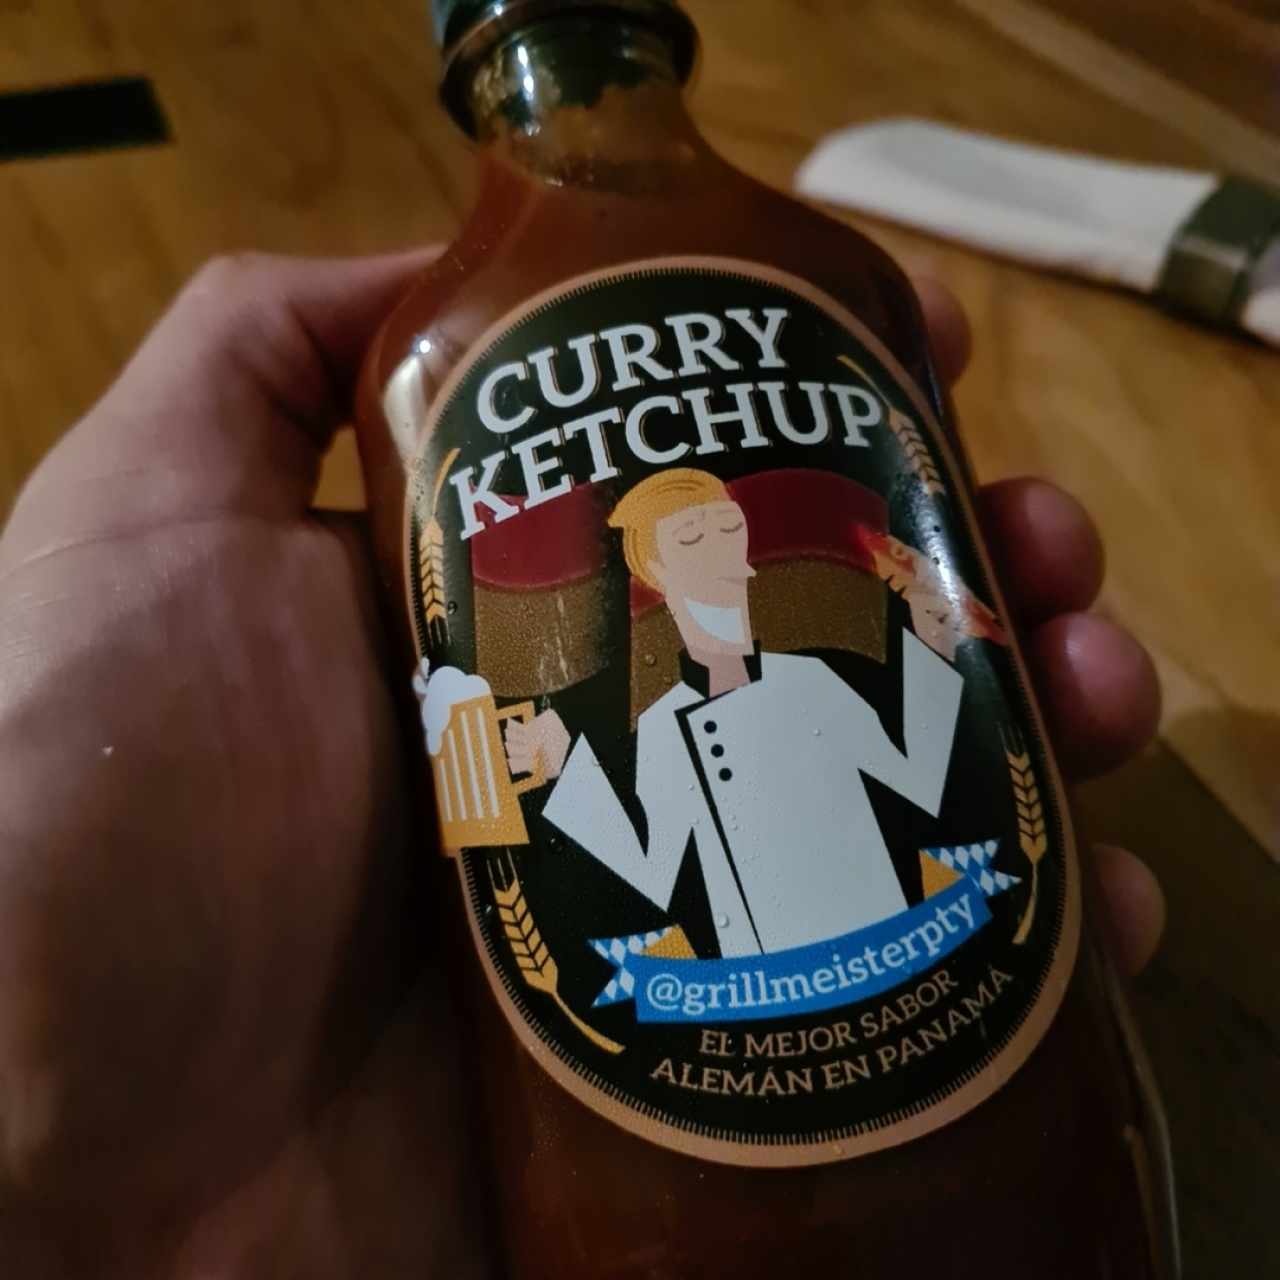 curry ketchup